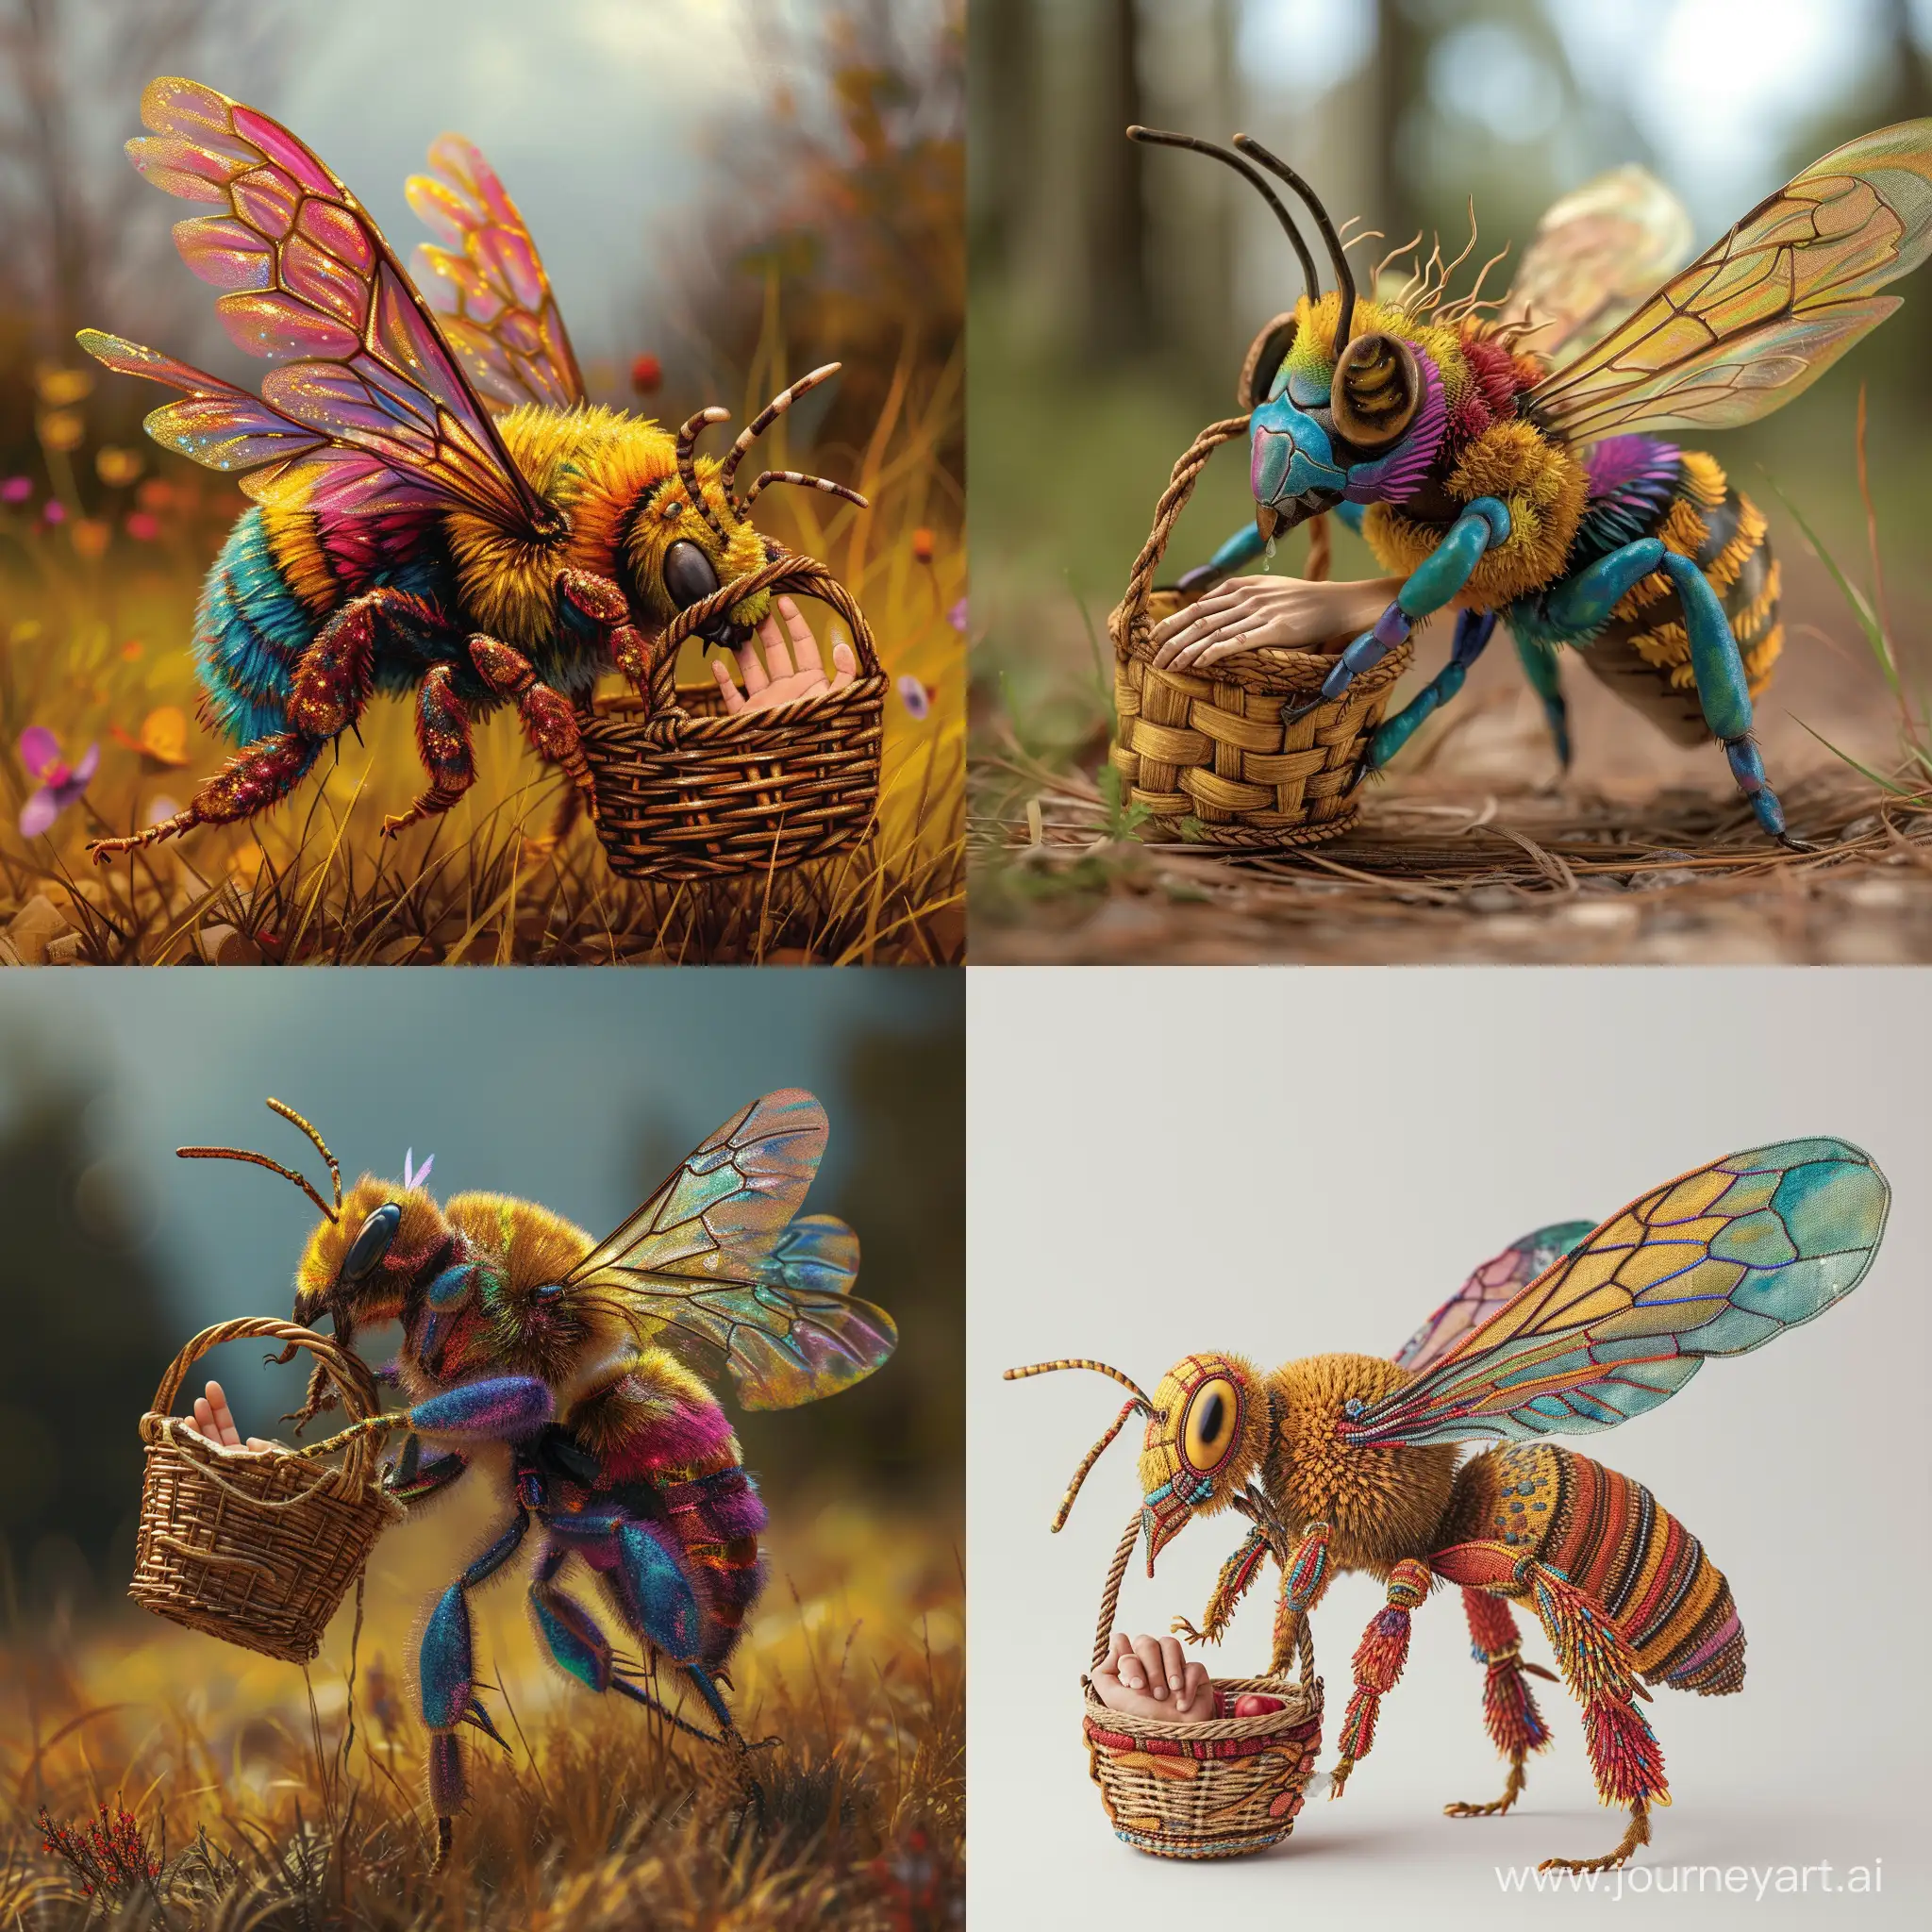 Vibrant-Giant-Bee-Carrying-Basket-with-Human-Hand